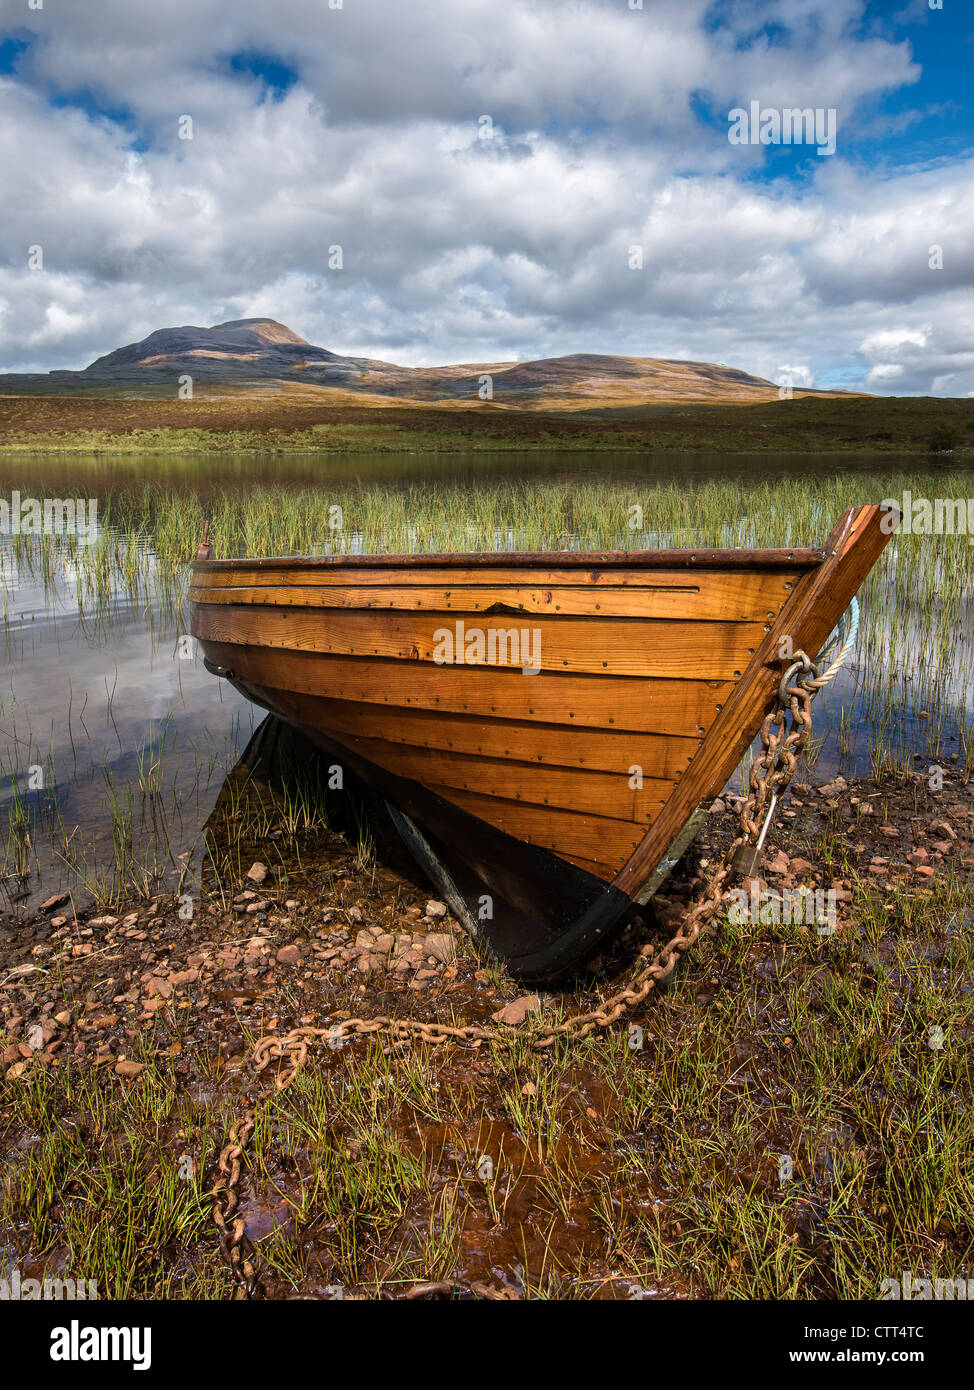 A wooden clinker built rowing boat used for fly fishing on a Scottish Loch Stock Photo